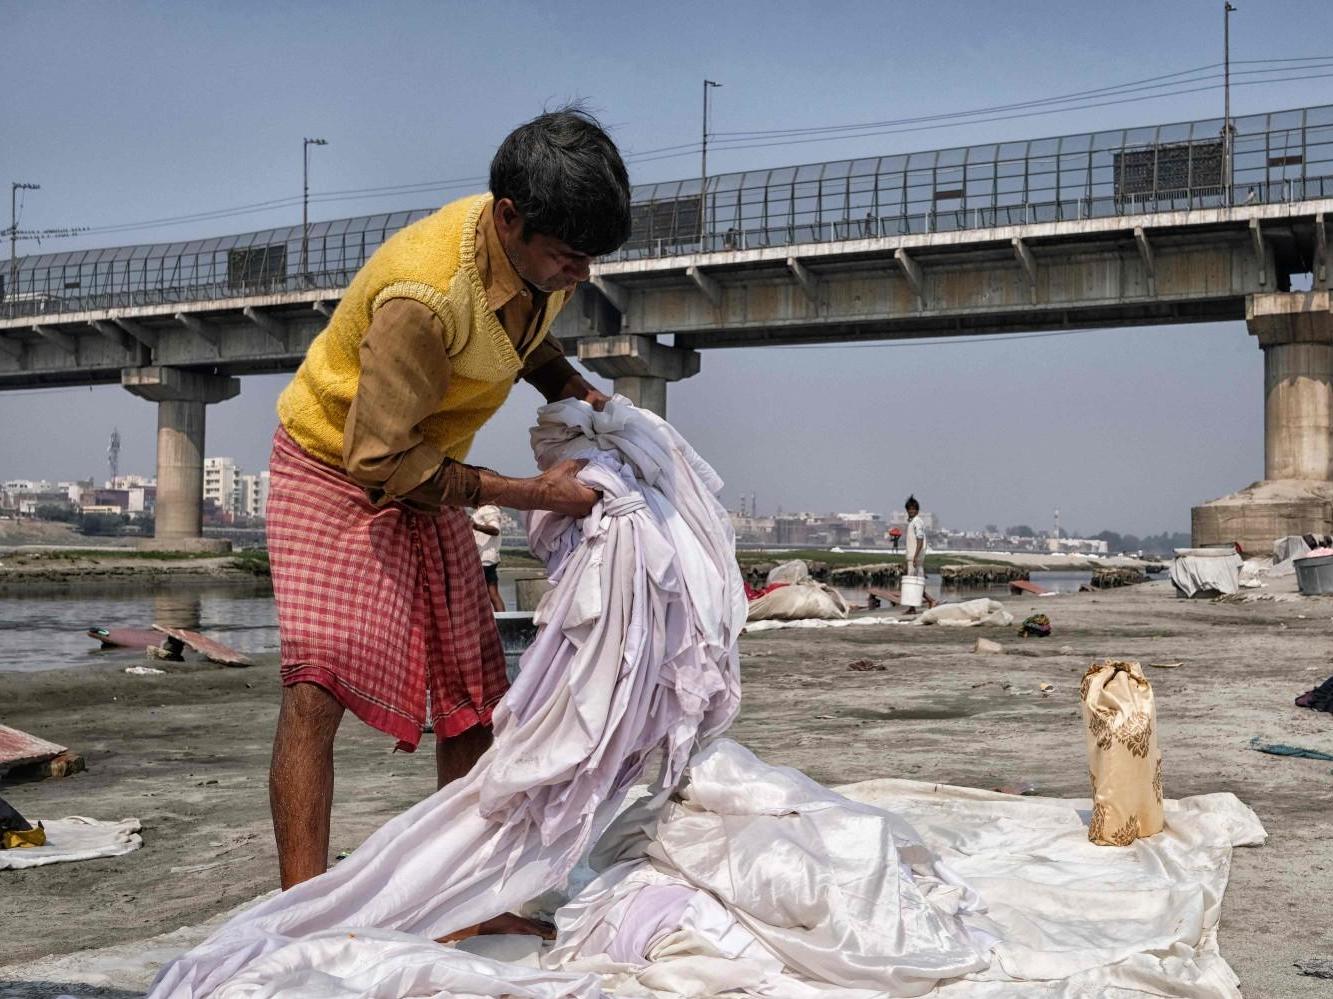 In this picture taken on February 12 2020 a man washes clothes on the banks of the Yamuna river in Agra